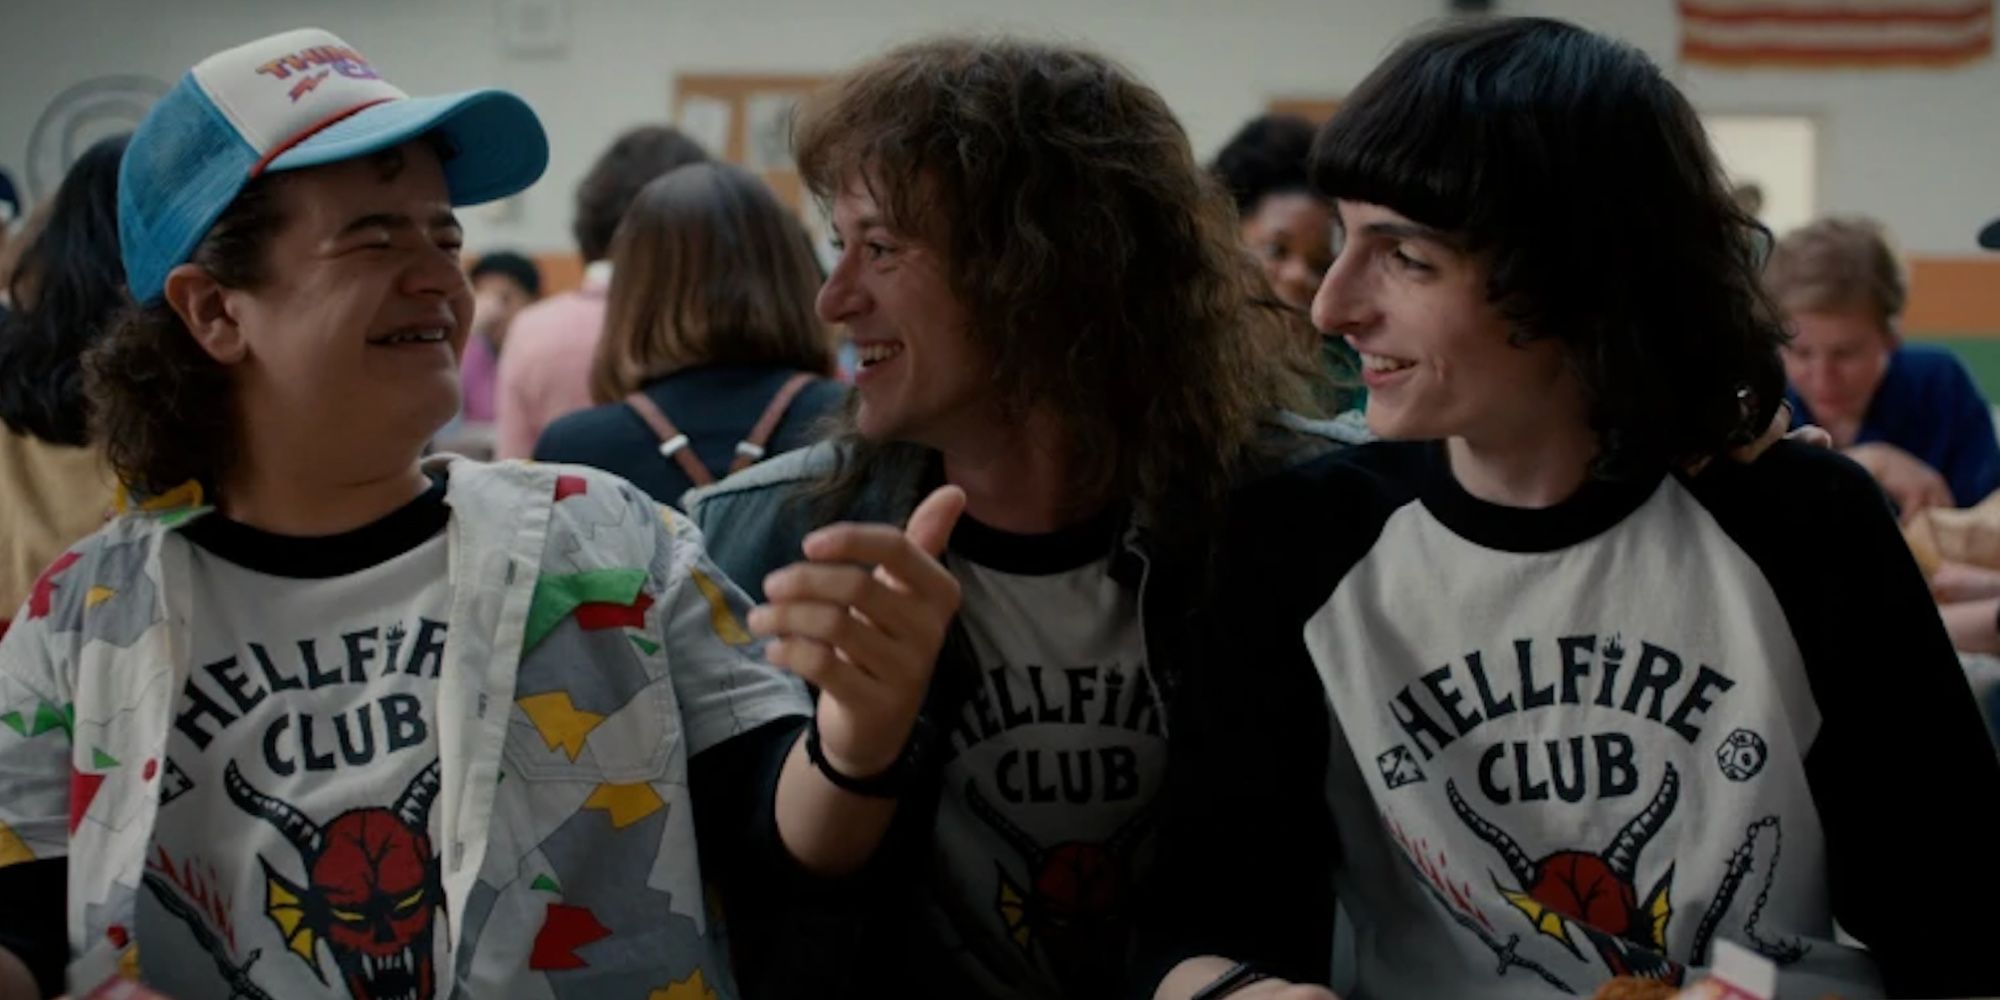 Dustin Eddie and Mike in the cafeteria on Stranger Things